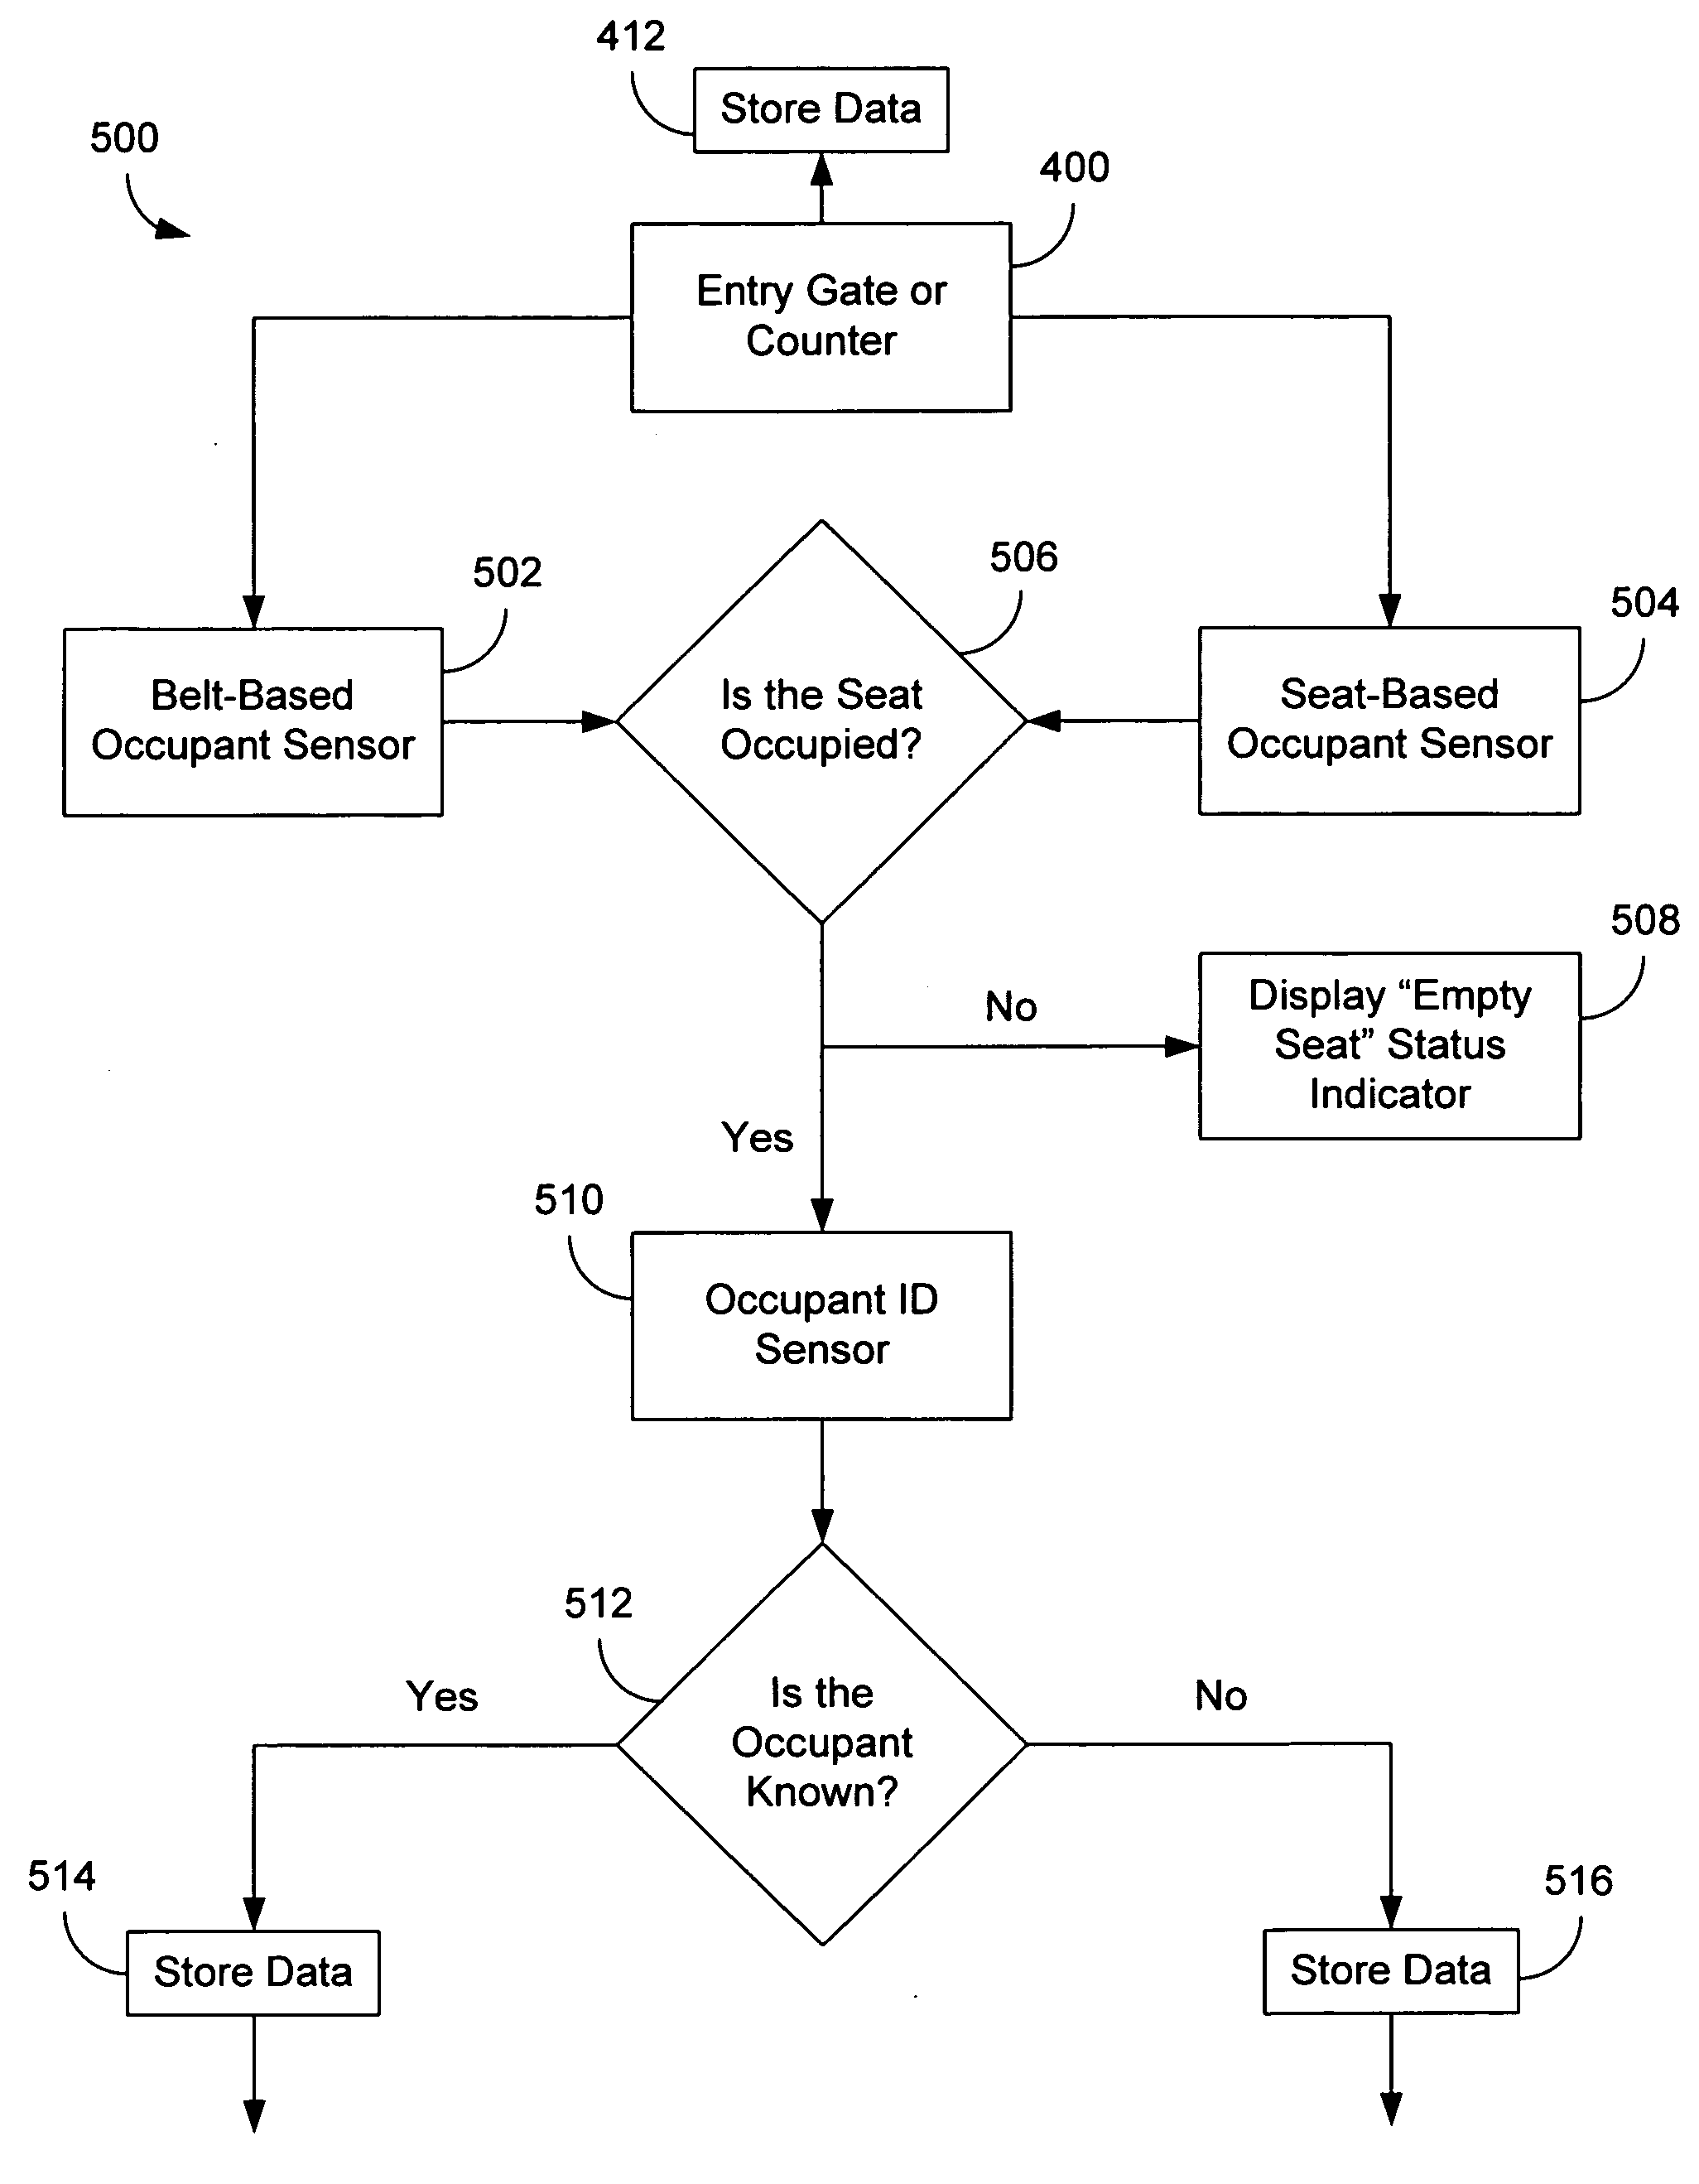 Occupant monitoring and restraint status system